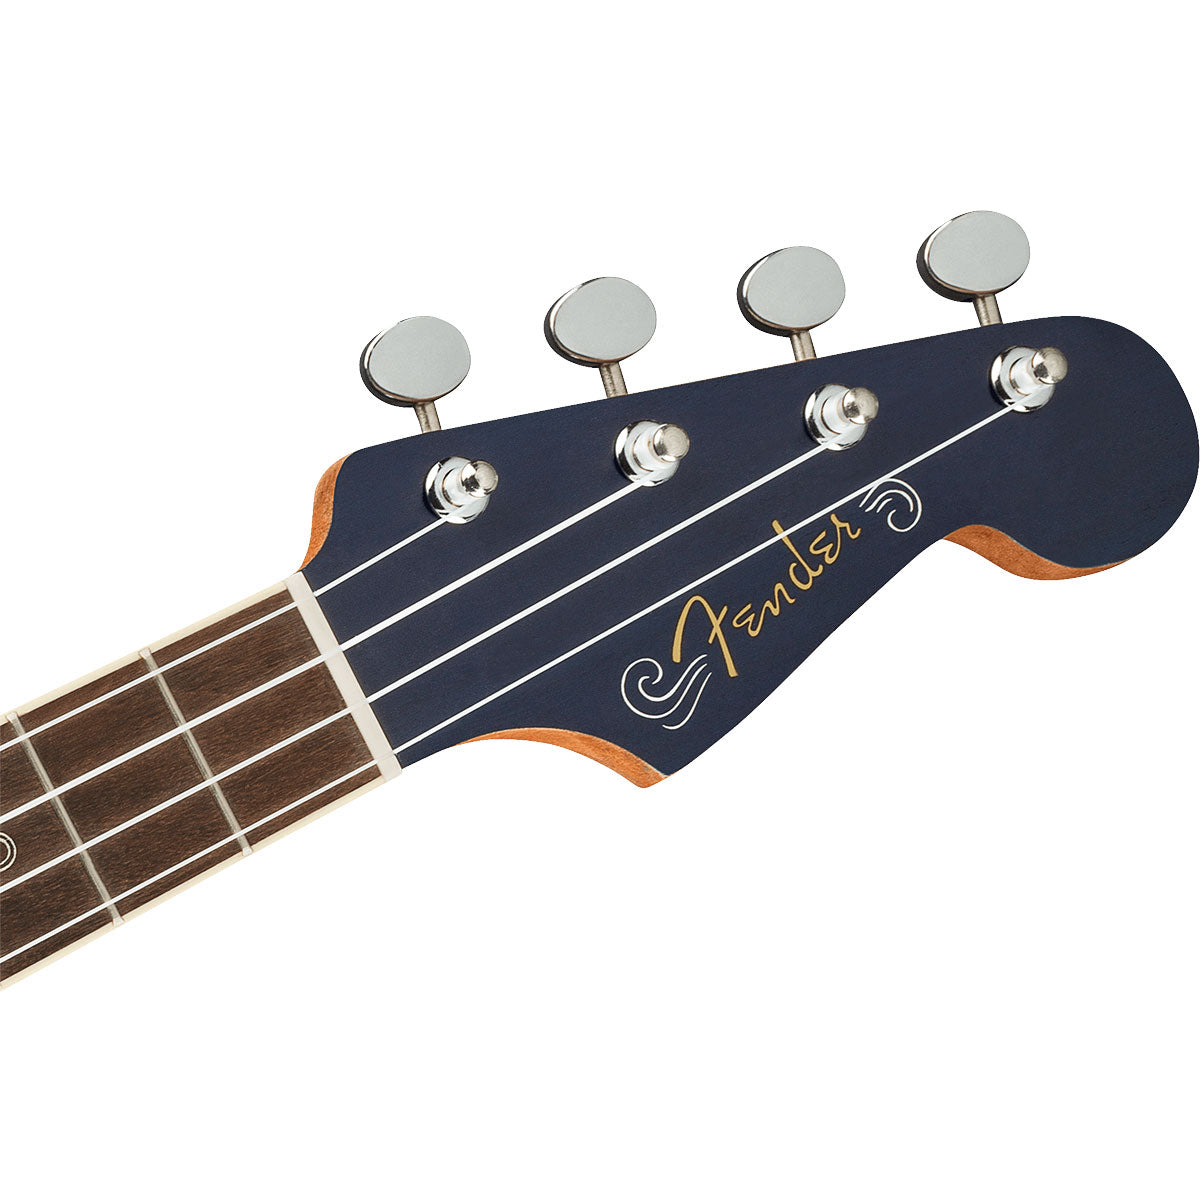 Detail image of Fender Dhani Harrison Signature Ukulele - Sapphire Blue showing top of headstock and portion of fretboard